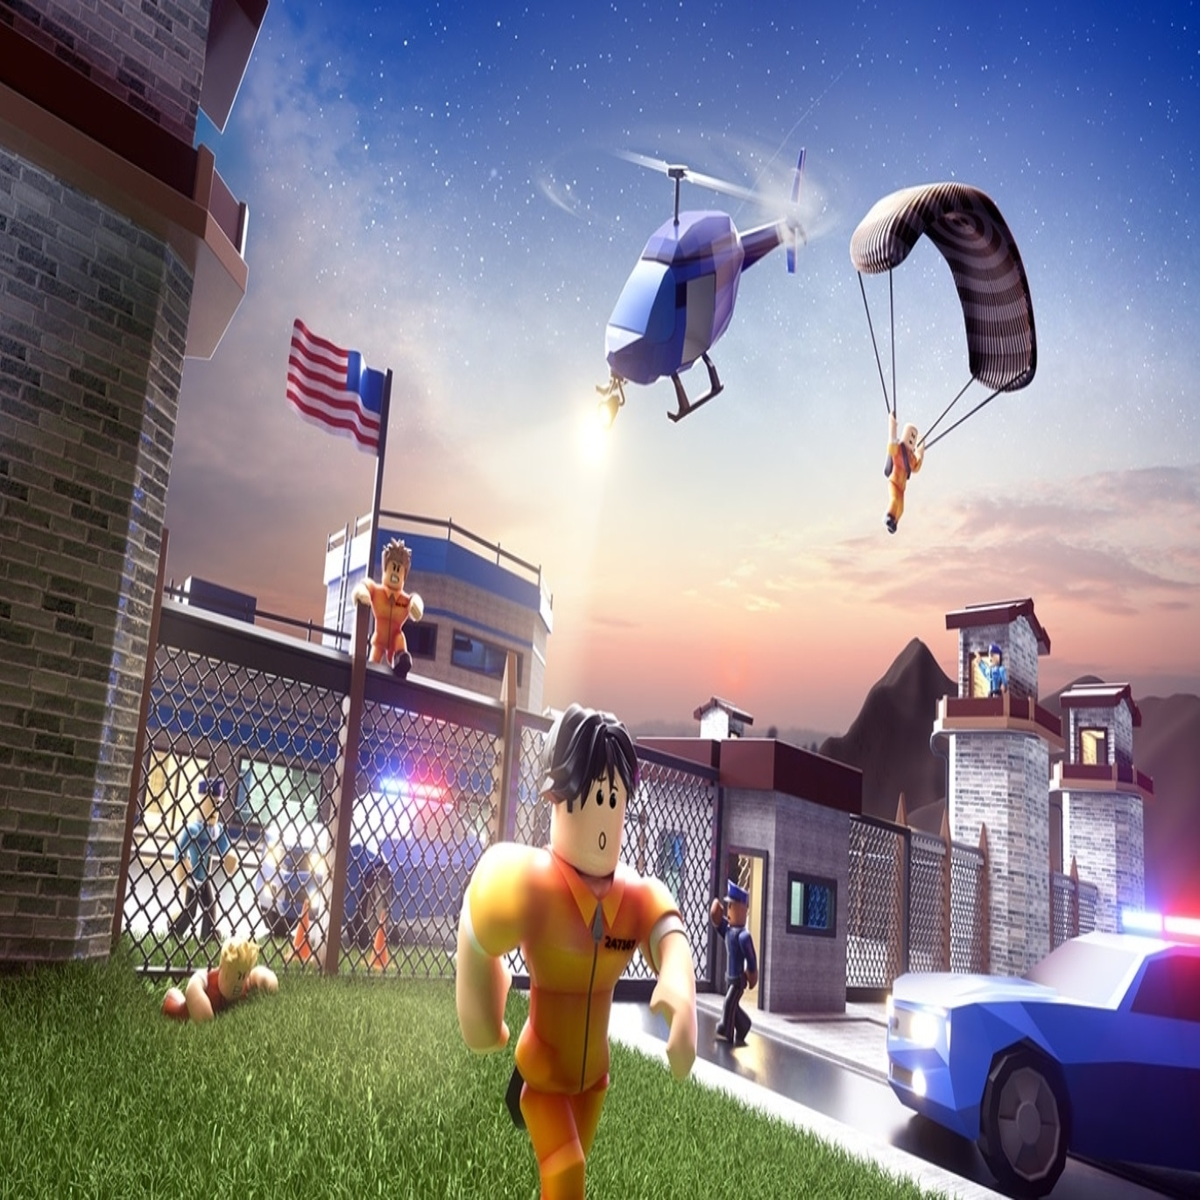 Sony wants Roblox on PlayStation despite “child safety concerns